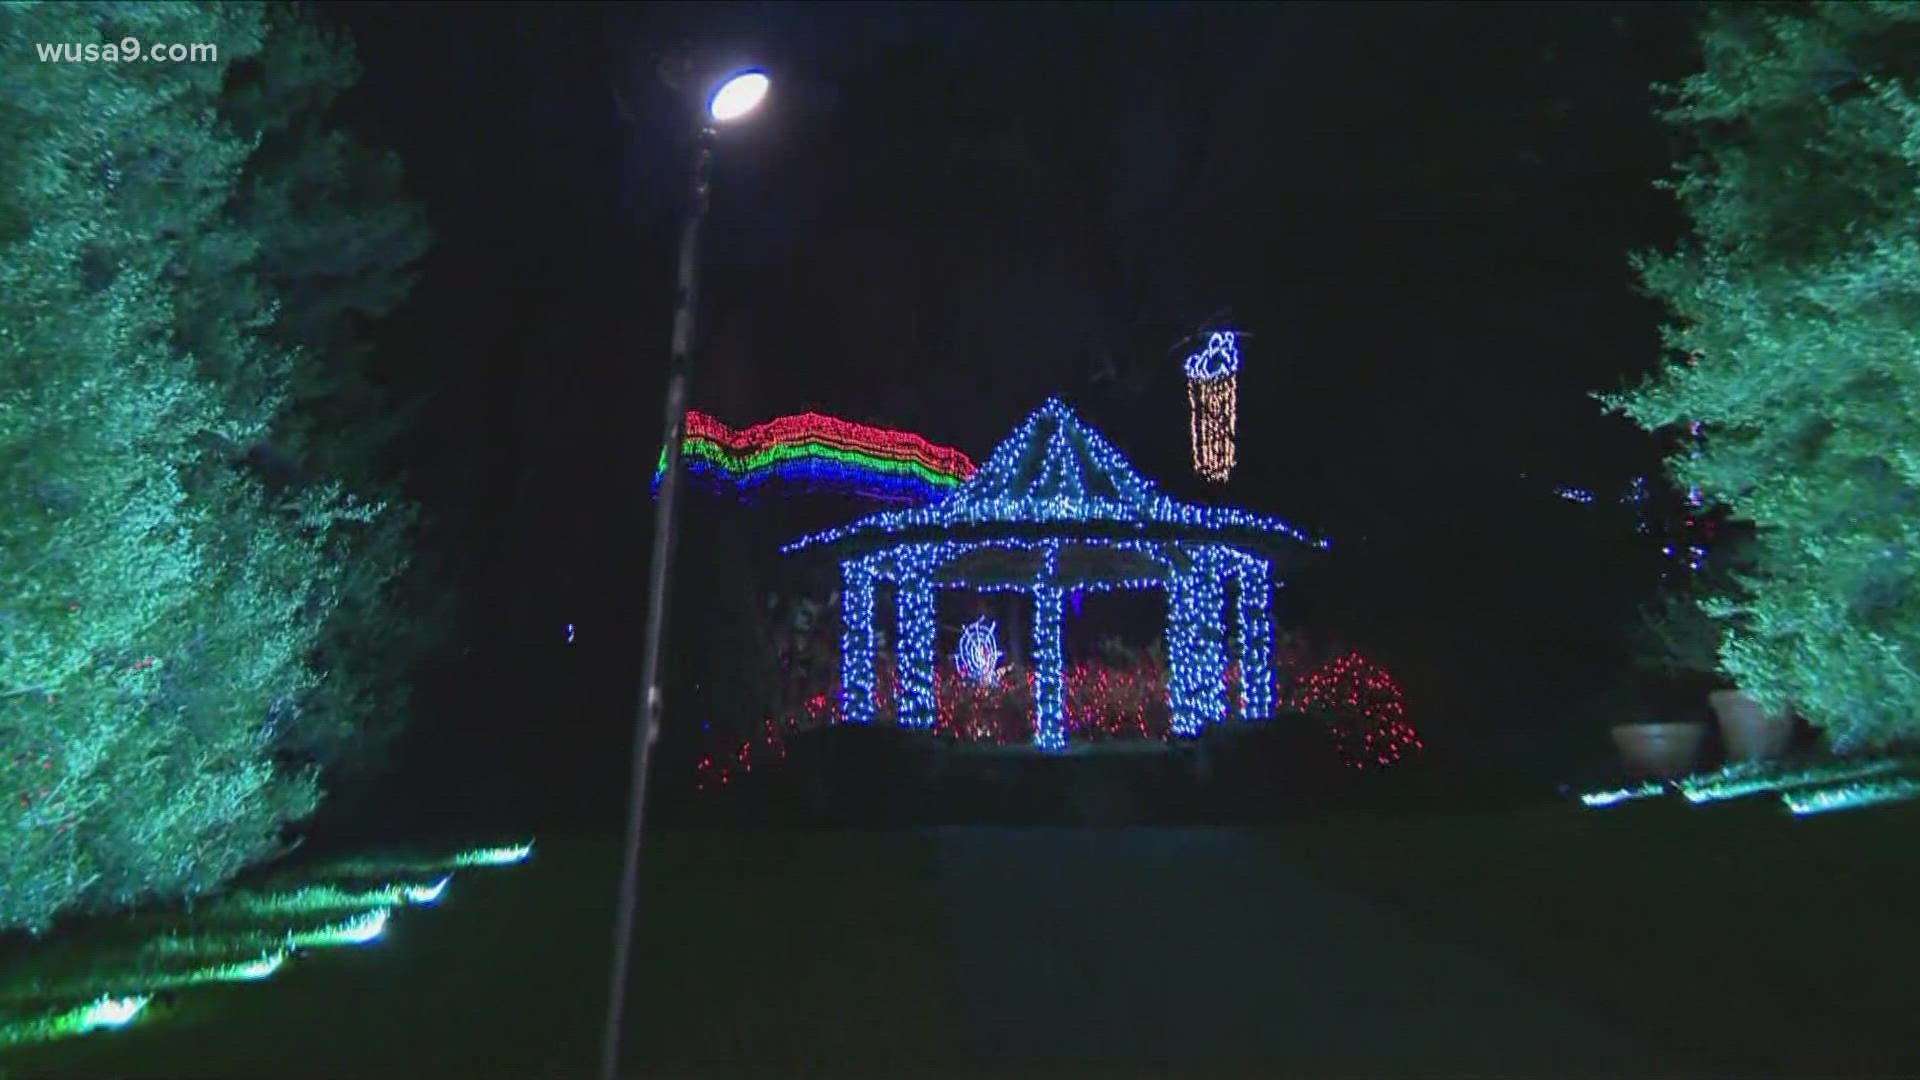 The sprawling holiday light show is celebrating its 23rd year.